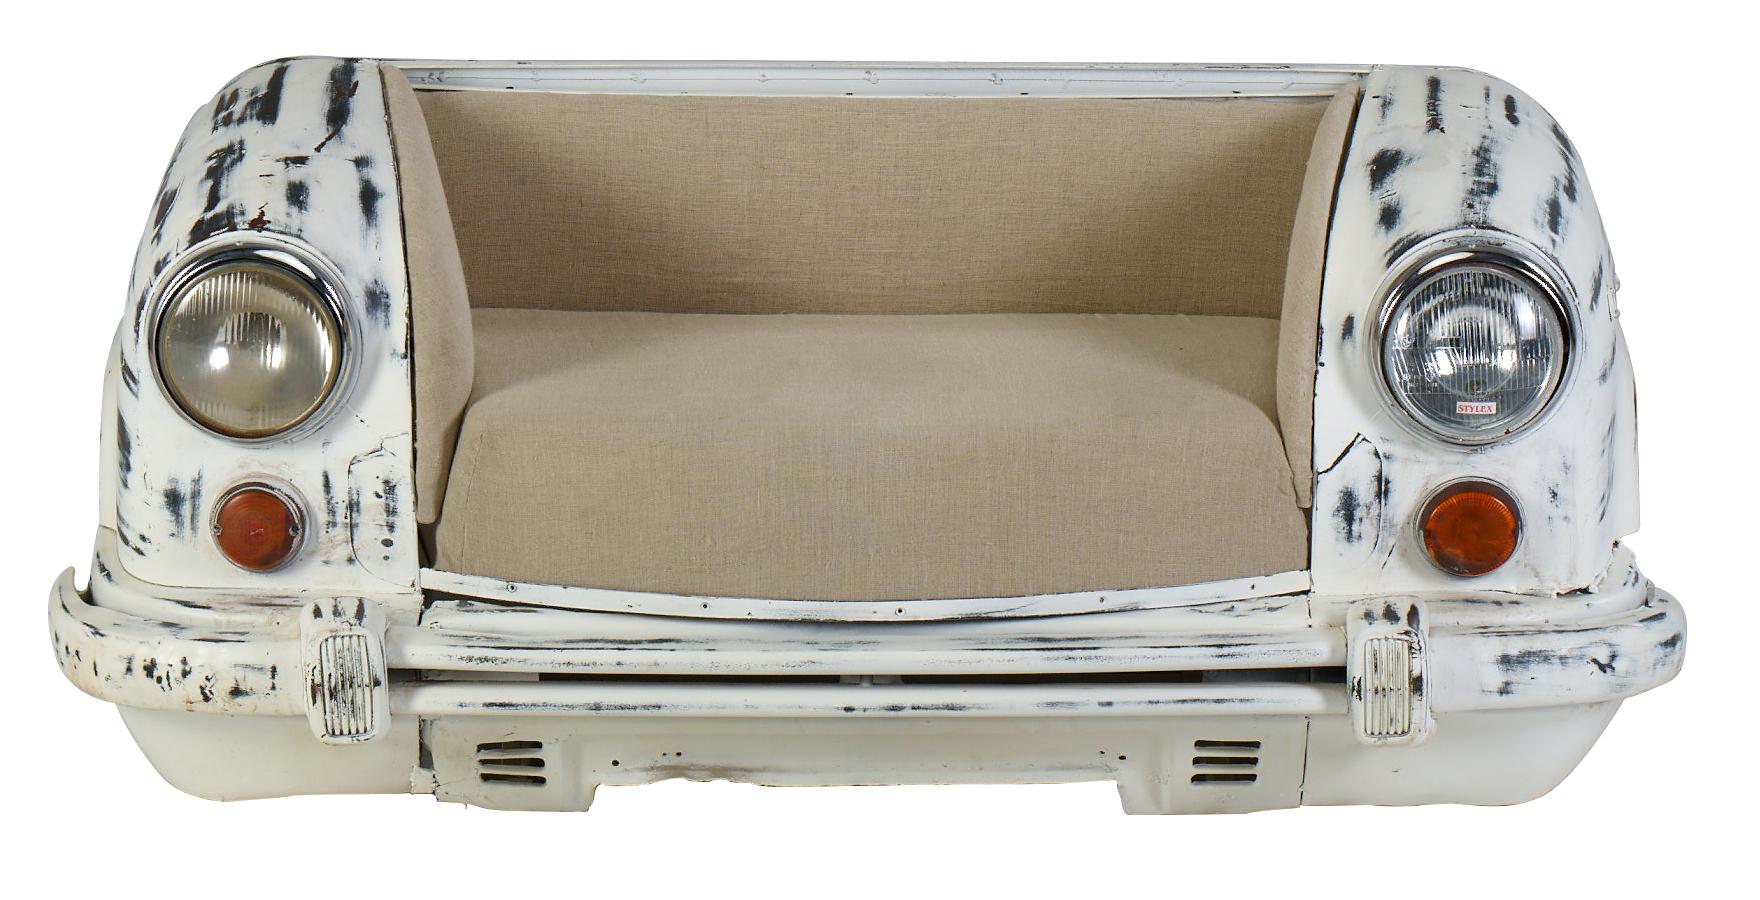 Urban Seater WOW-070 Route 66 WOW-070 in White, Beige Linen